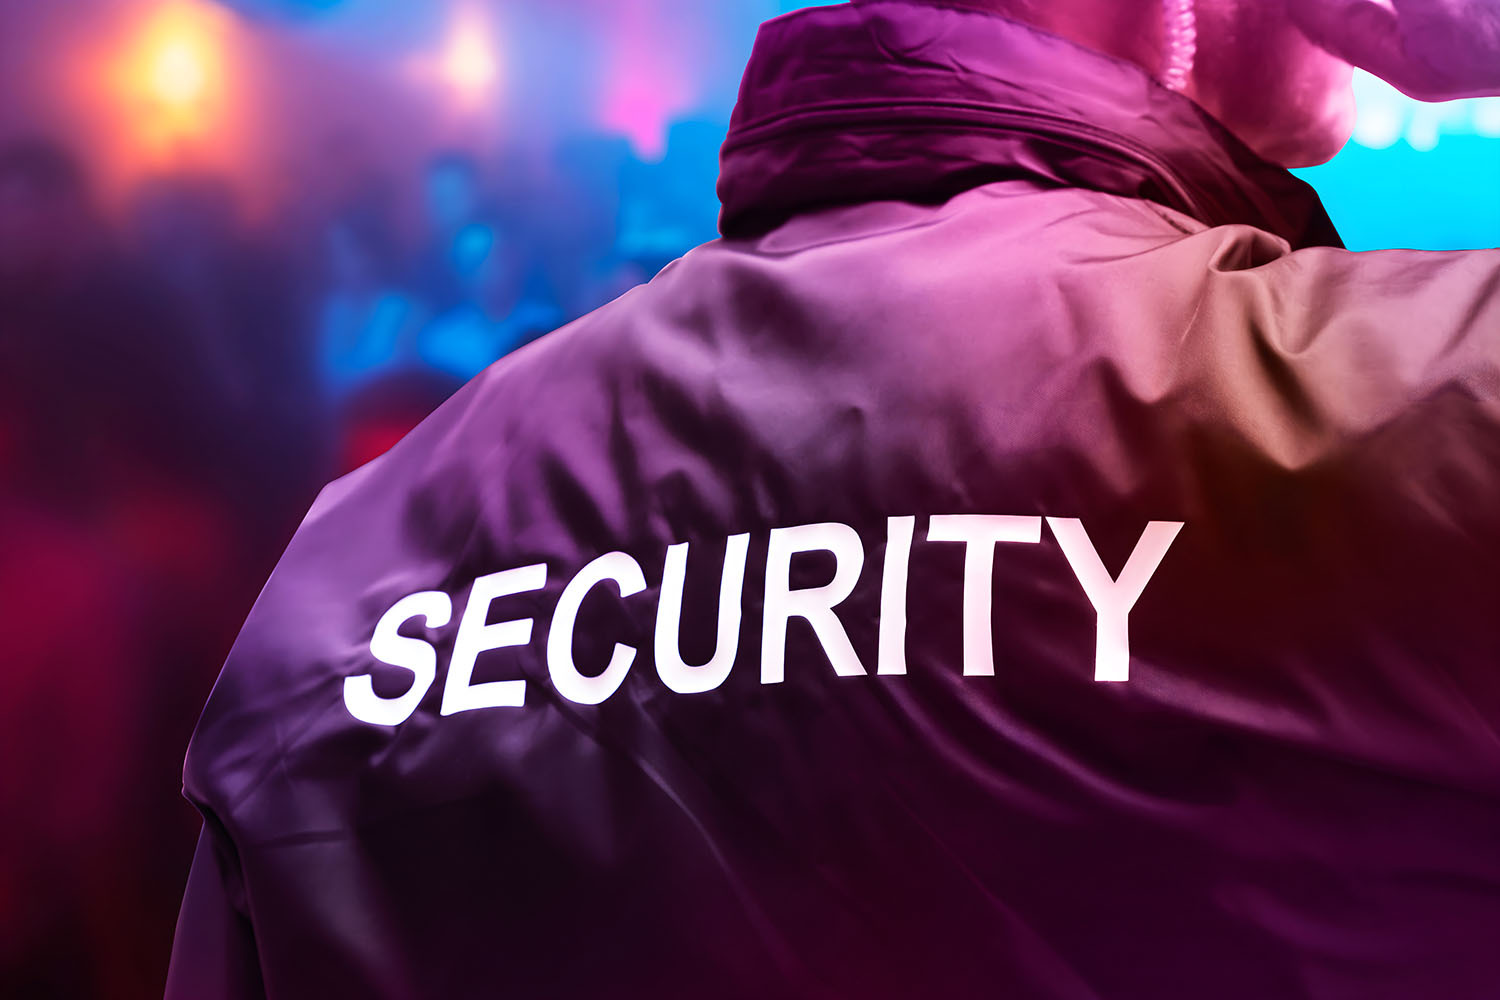 5 Common Challenges and Solutions to Improving Security Officer Performance and Engagement